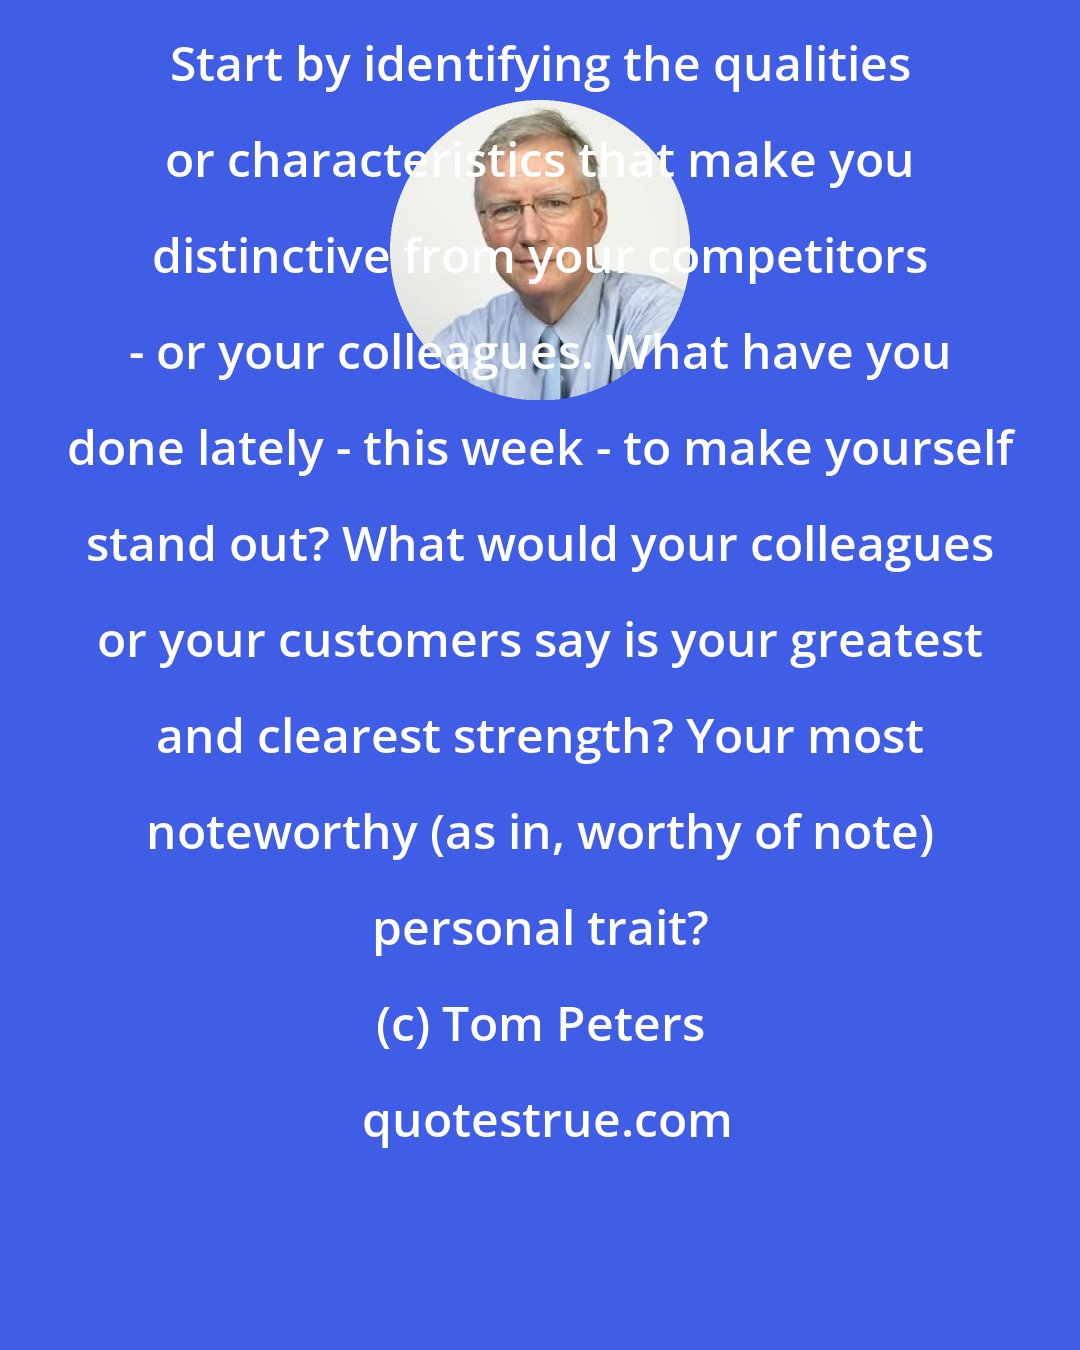 Tom Peters: Start by identifying the qualities or characteristics that make you distinctive from your competitors - or your colleagues. What have you done lately - this week - to make yourself stand out? What would your colleagues or your customers say is your greatest and clearest strength? Your most noteworthy (as in, worthy of note) personal trait?